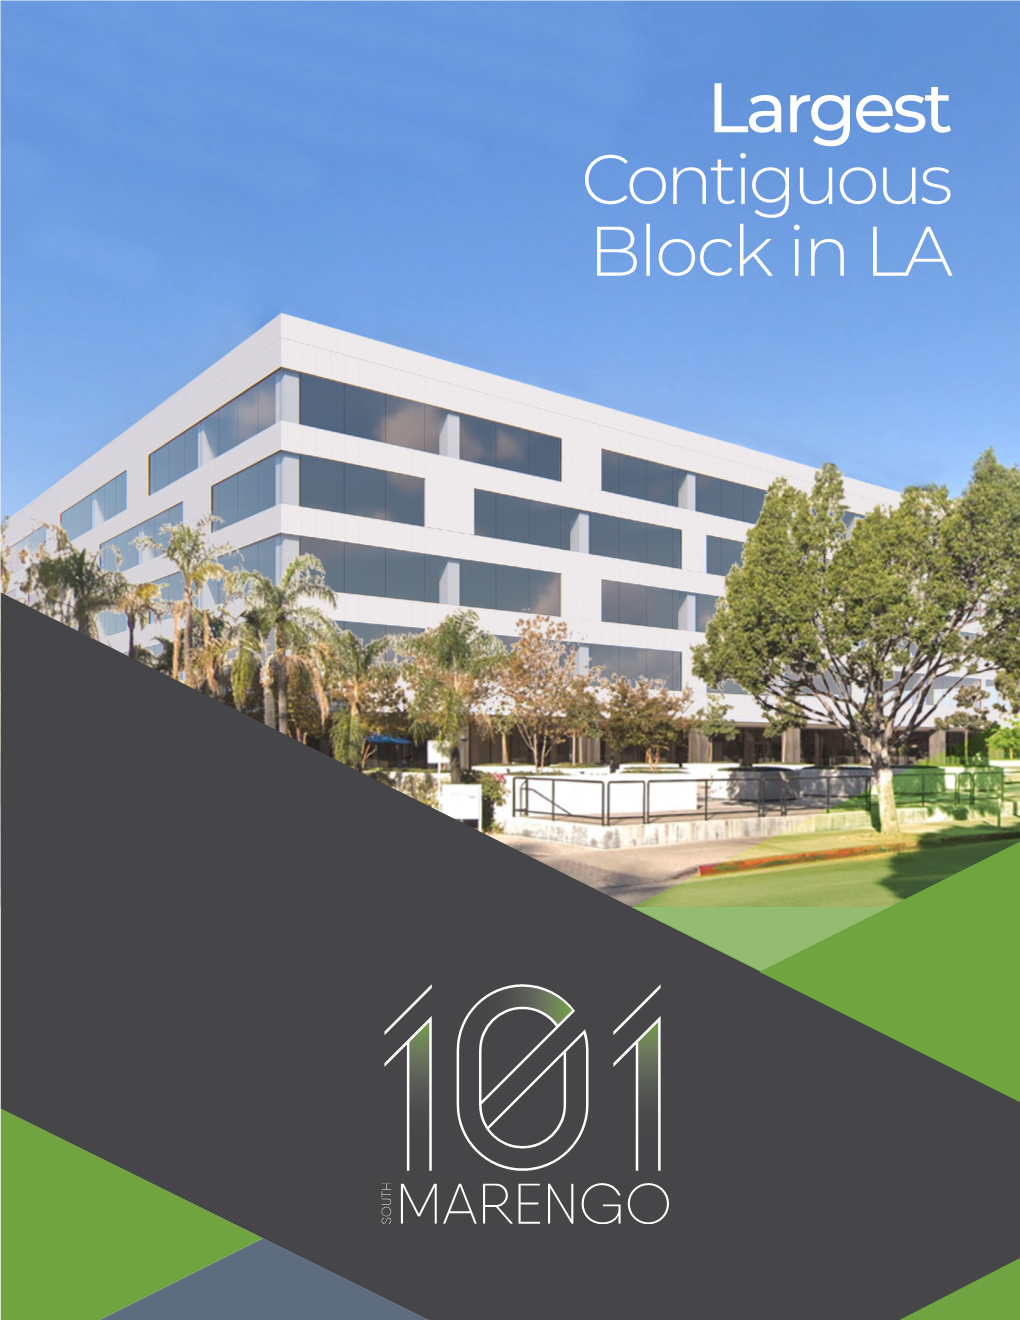 Largest Contiguous Block in LA 101 SOUTH MARENGO Forward-Thinking Workspace